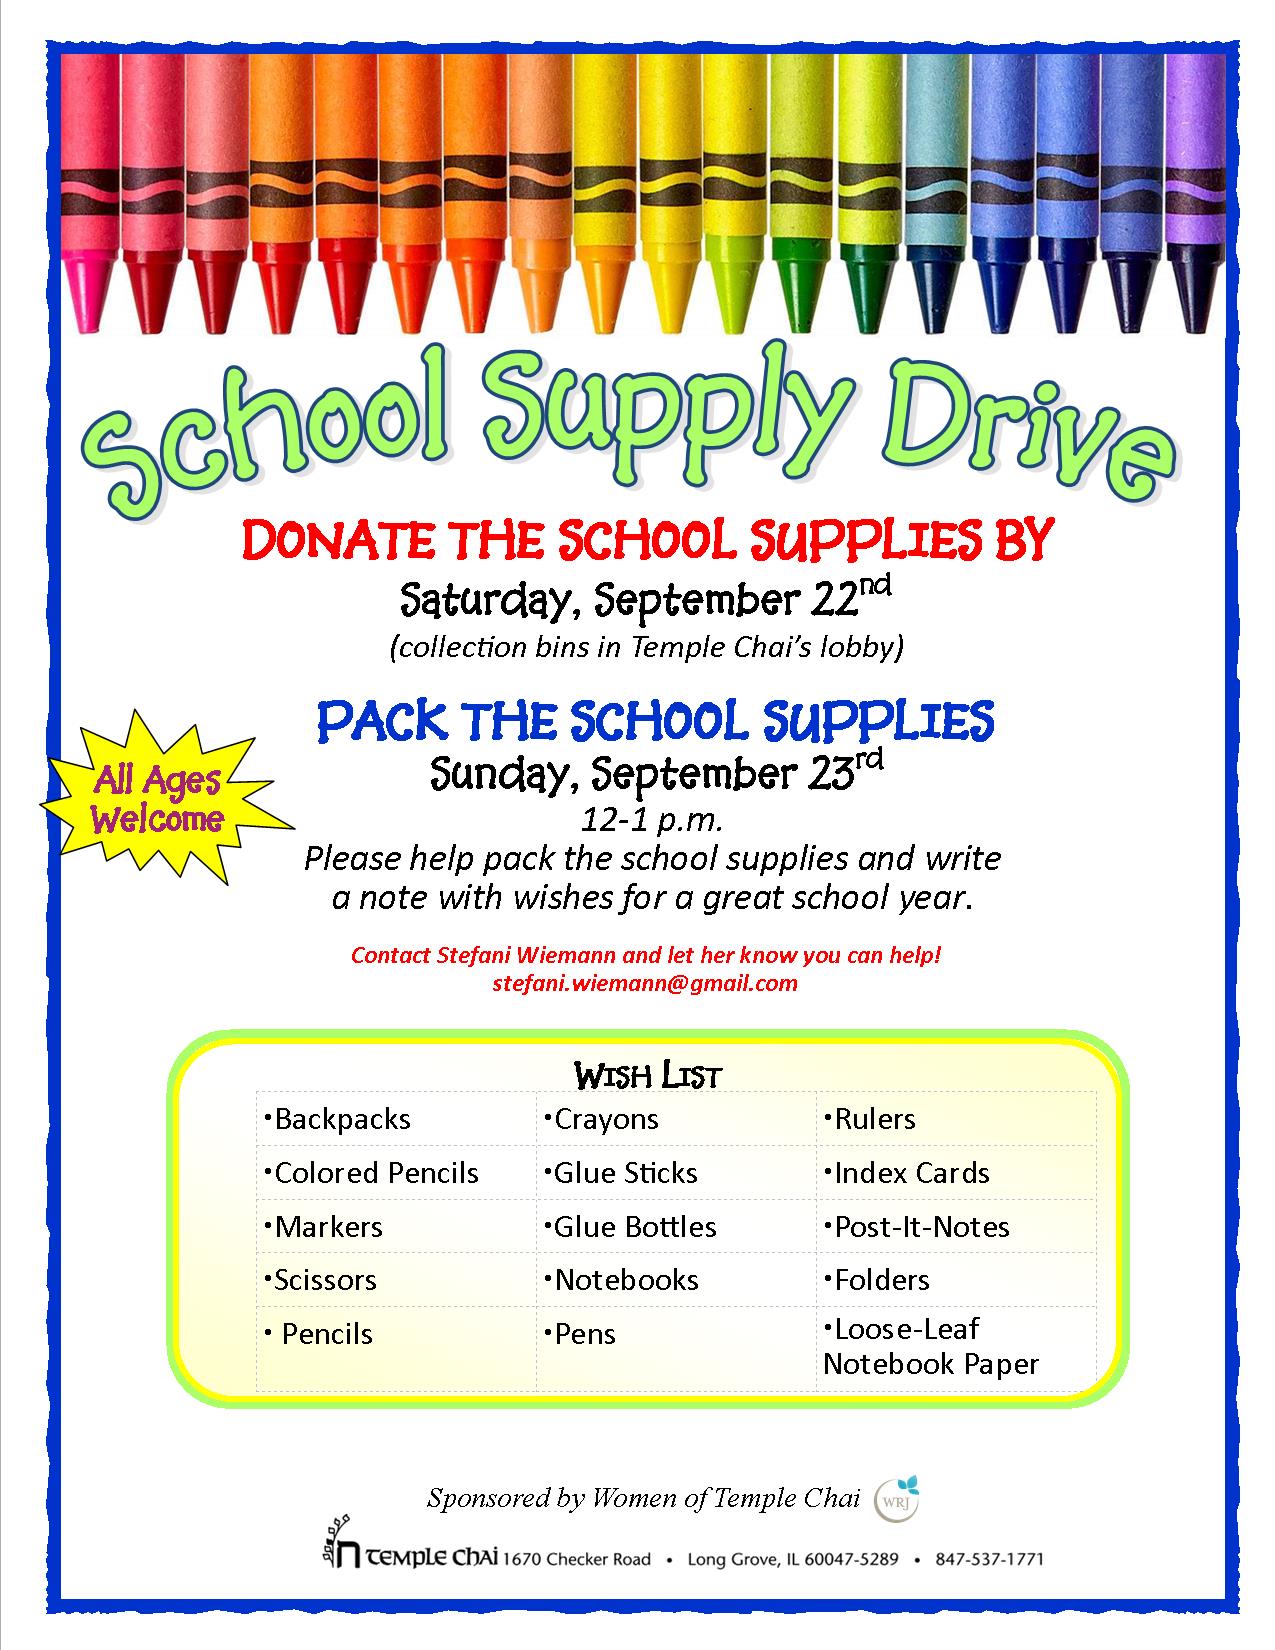 Where to Donate School Supplies